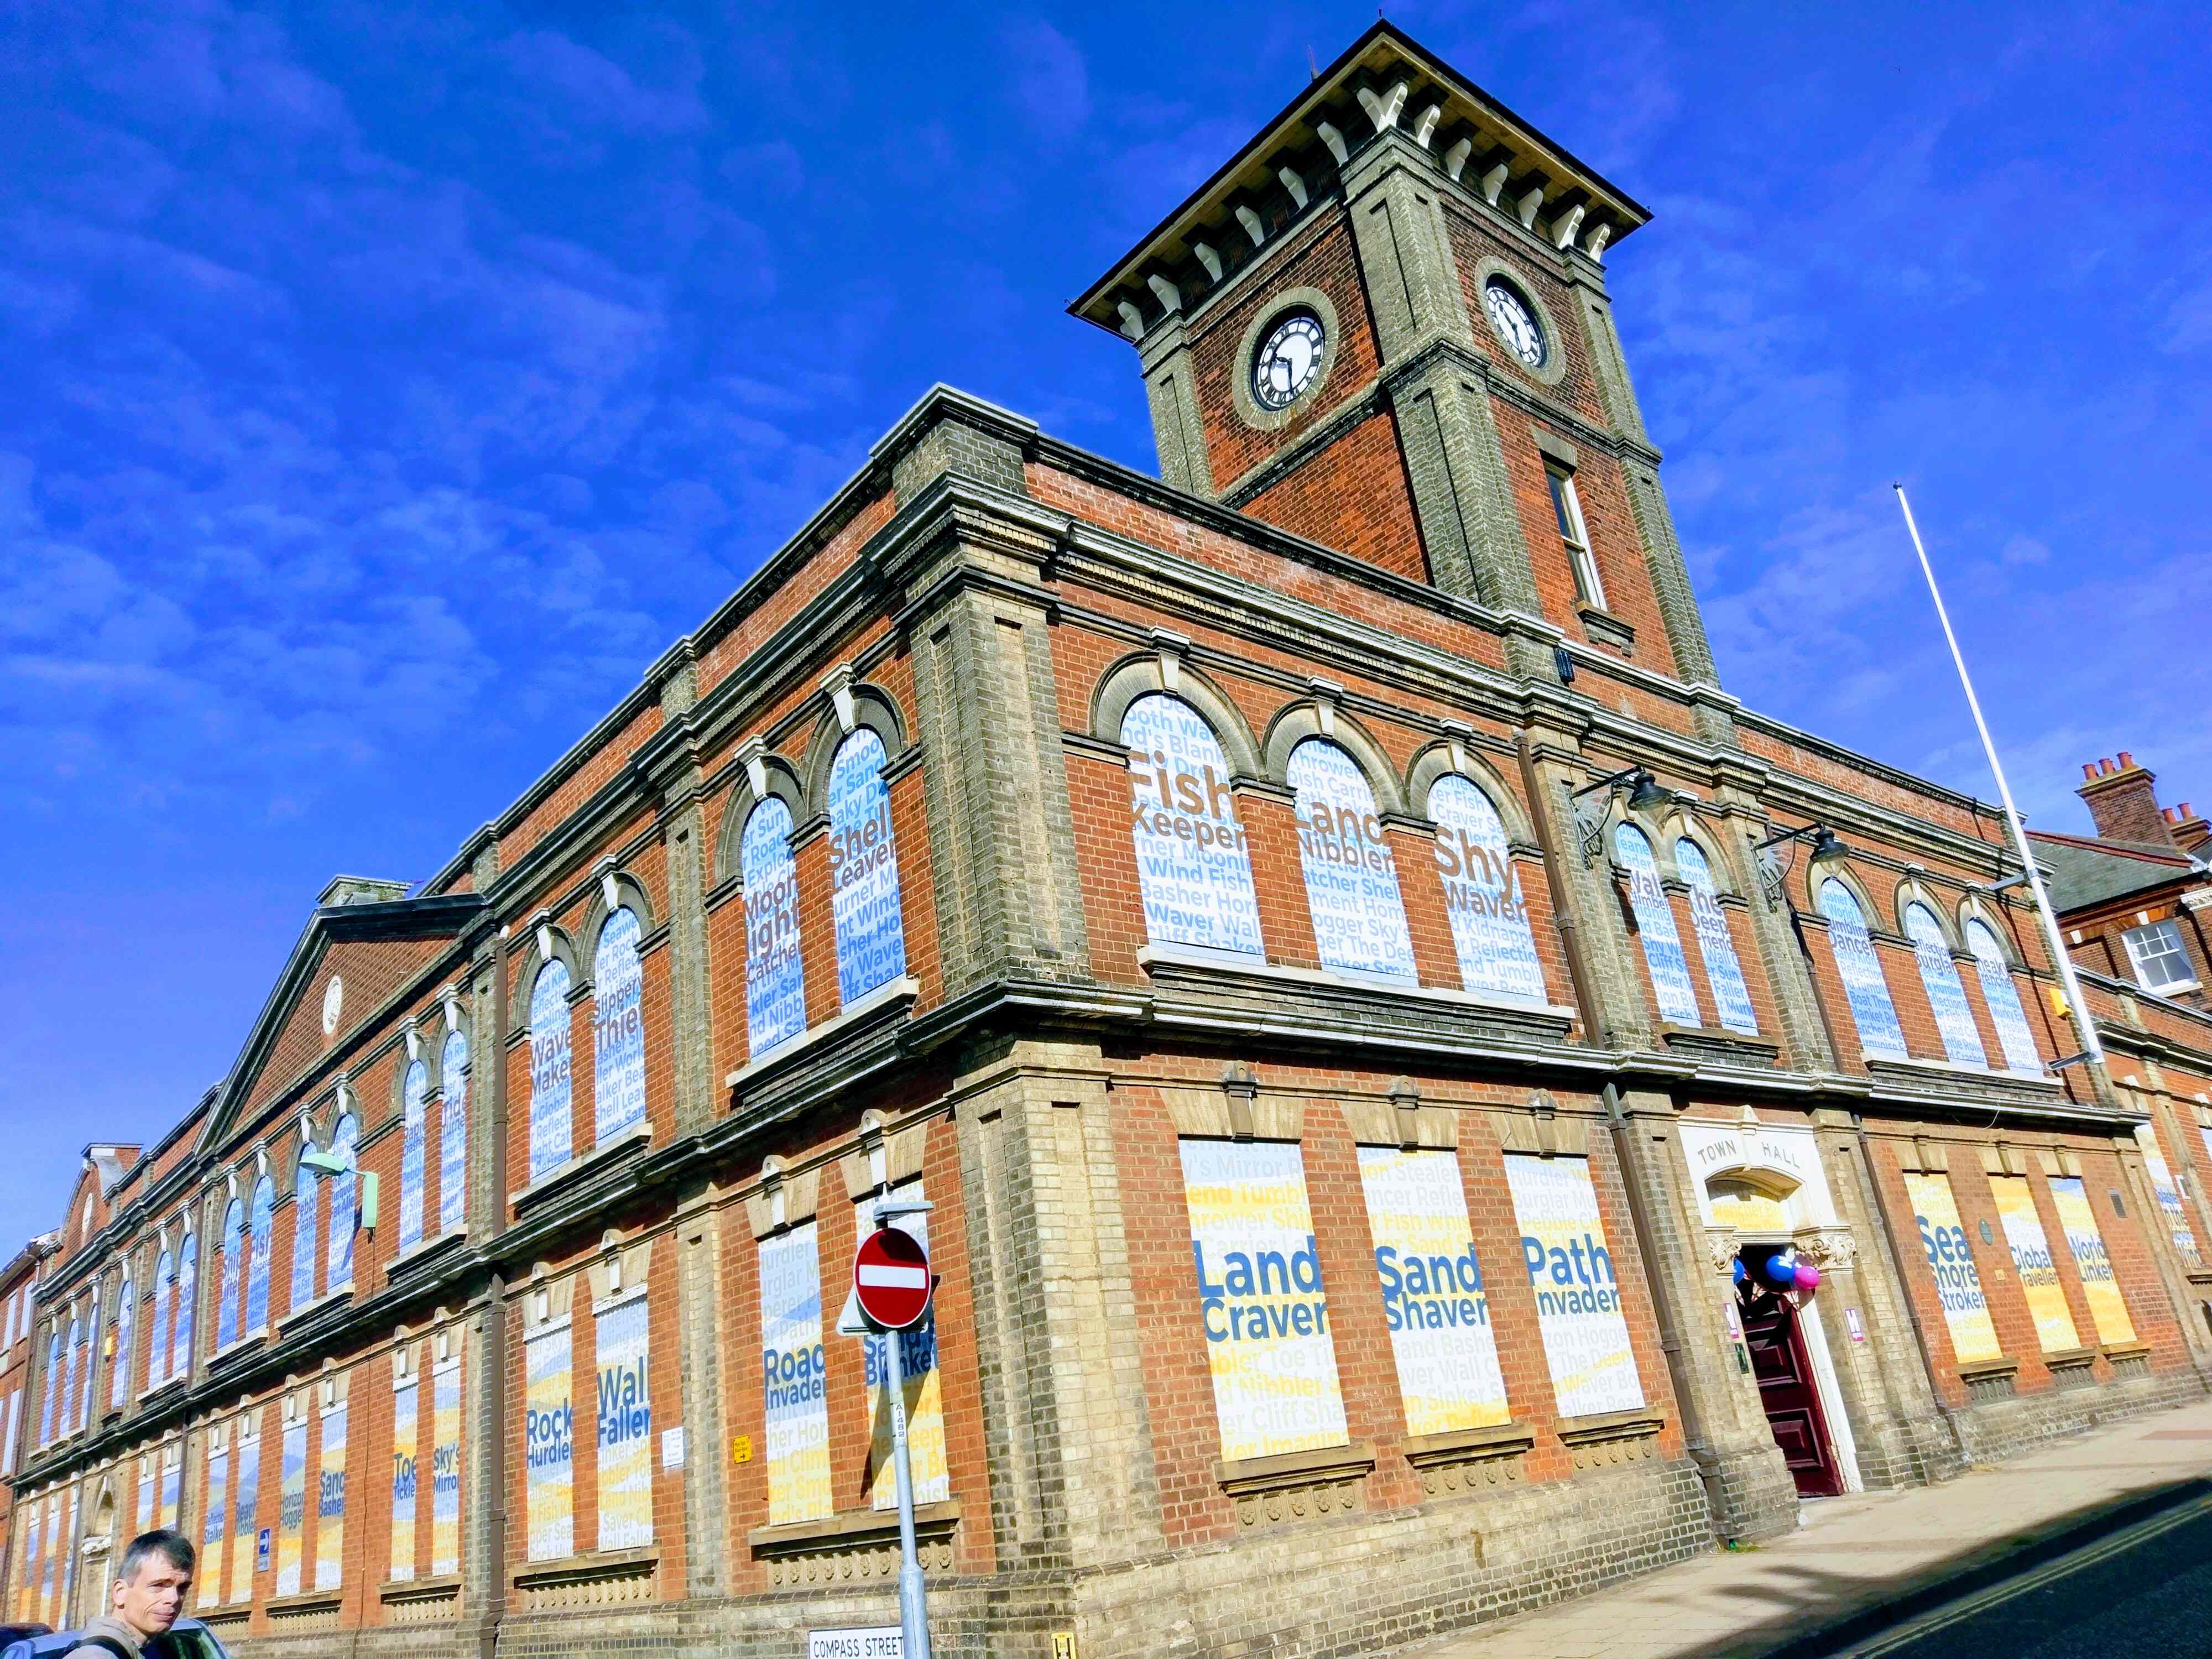 Town Hall building in brick with clock tower